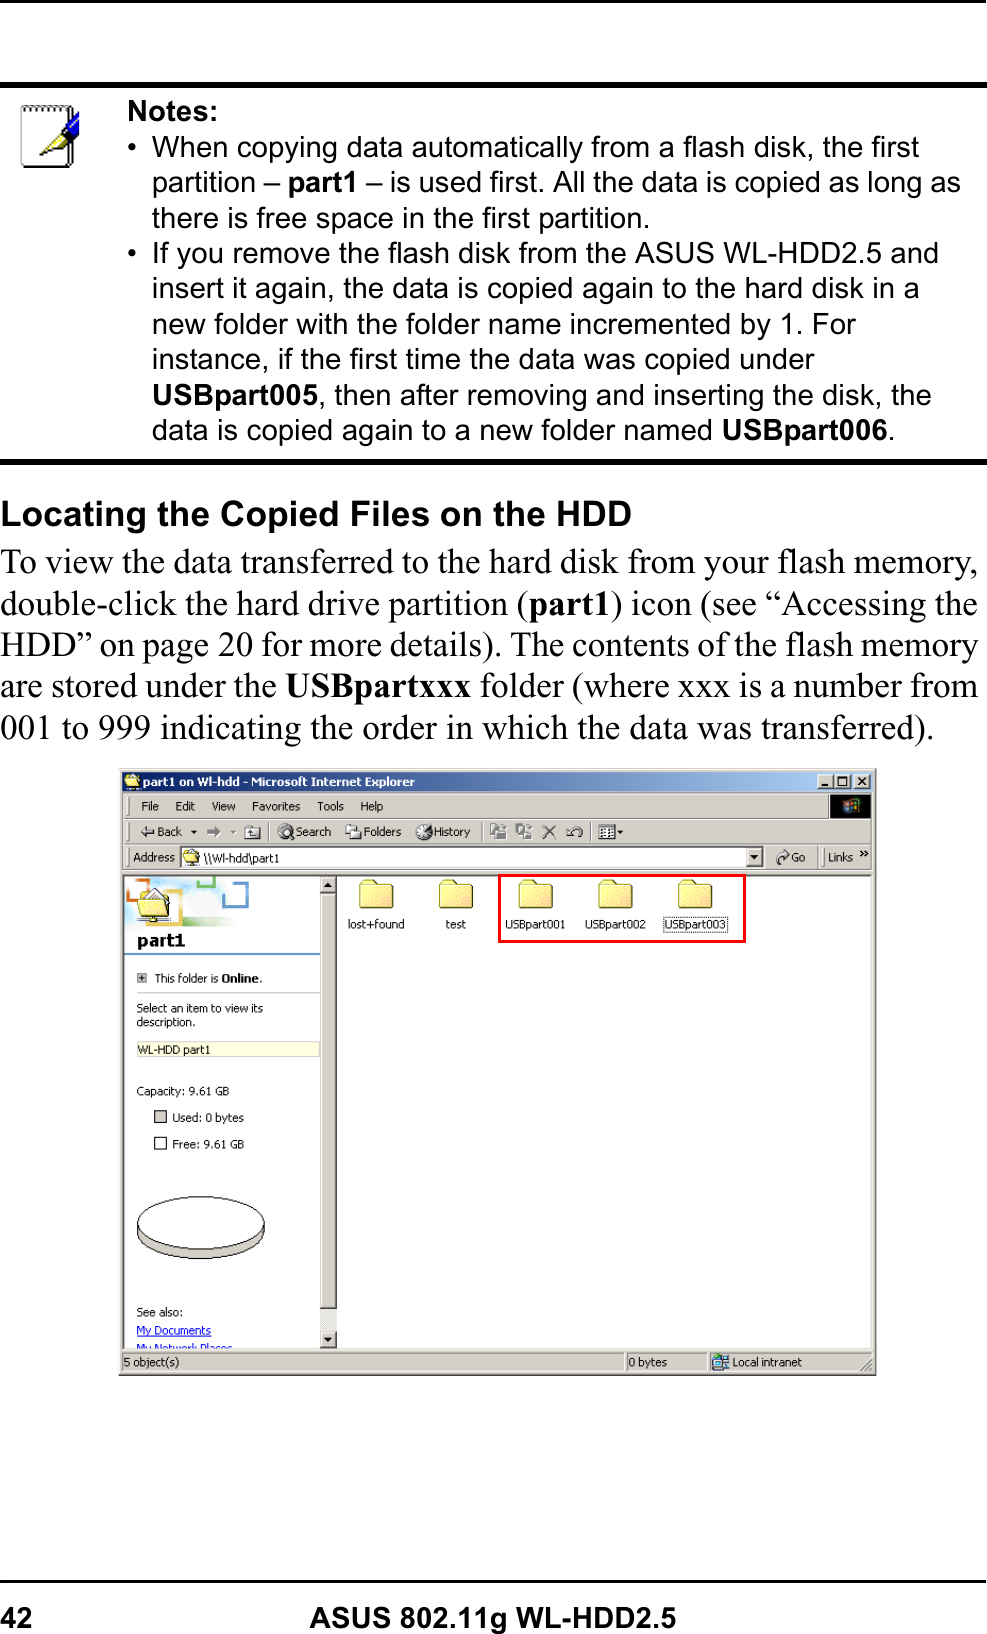 42 ASUS 802.11g WL-HDD2.5Locating the Copied Files on the HDDTo view the data transferred to the hard disk from your flash memory, double-click the hard drive partition (part1) icon (see “Accessing the HDD” on page 20 for more details). The contents of the flash memory are stored under the USBpartxxx folder (where xxx is a number from 001 to 999 indicating the order in which the data was transferred).Notes:• When copying data automatically from a flash disk, the first partition – part1 – is used first. All the data is copied as long as there is free space in the first partition.• If you remove the flash disk from the ASUS WL-HDD2.5 and insert it again, the data is copied again to the hard disk in a new folder with the folder name incremented by 1. For instance, if the first time the data was copied under USBpart005, then after removing and inserting the disk, the data is copied again to a new folder named USBpart006.